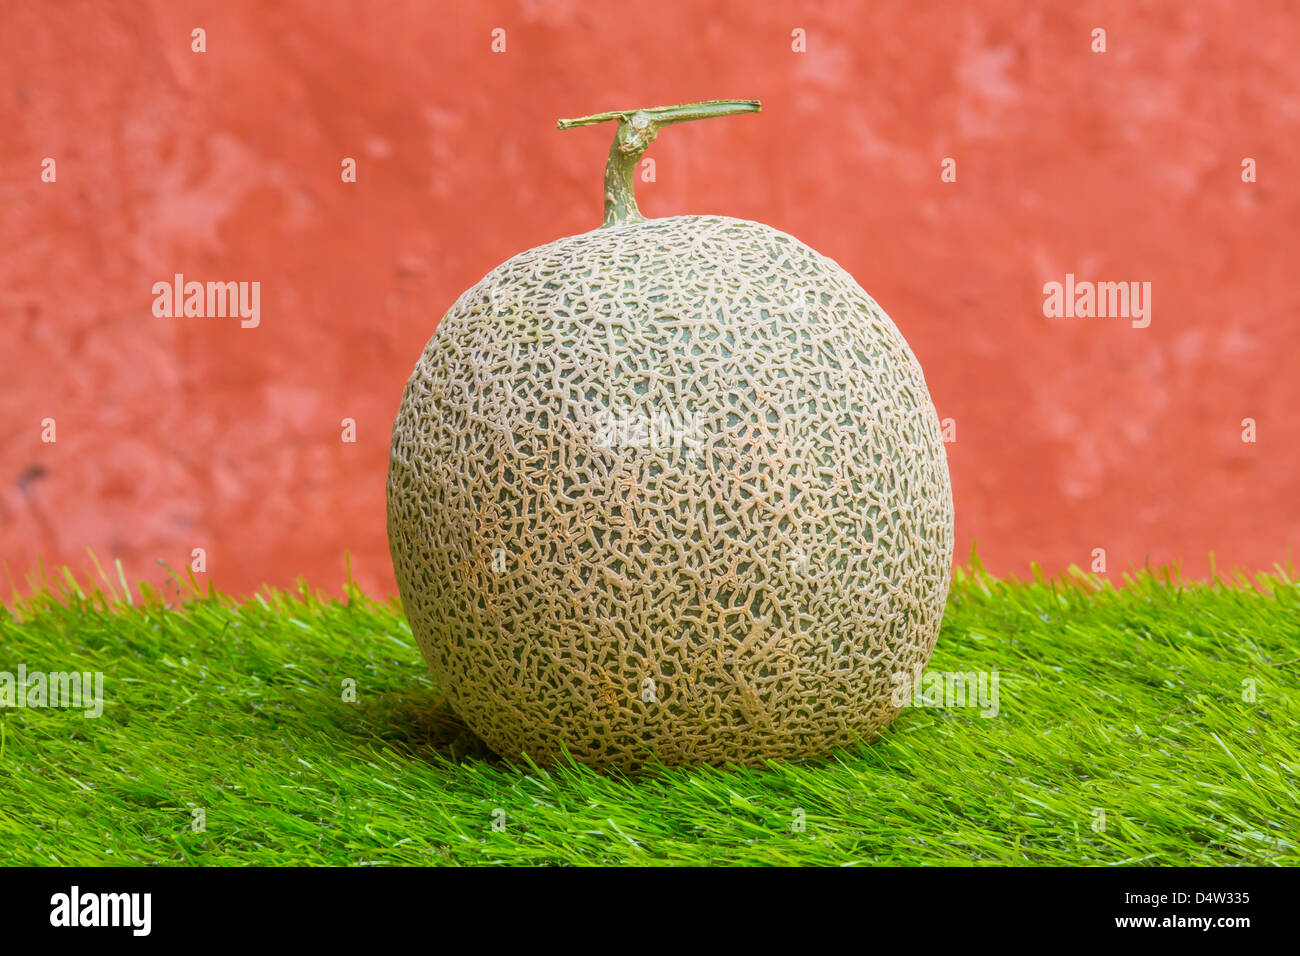 Japanese rock melon on green grass and grunge wall Stock Photo